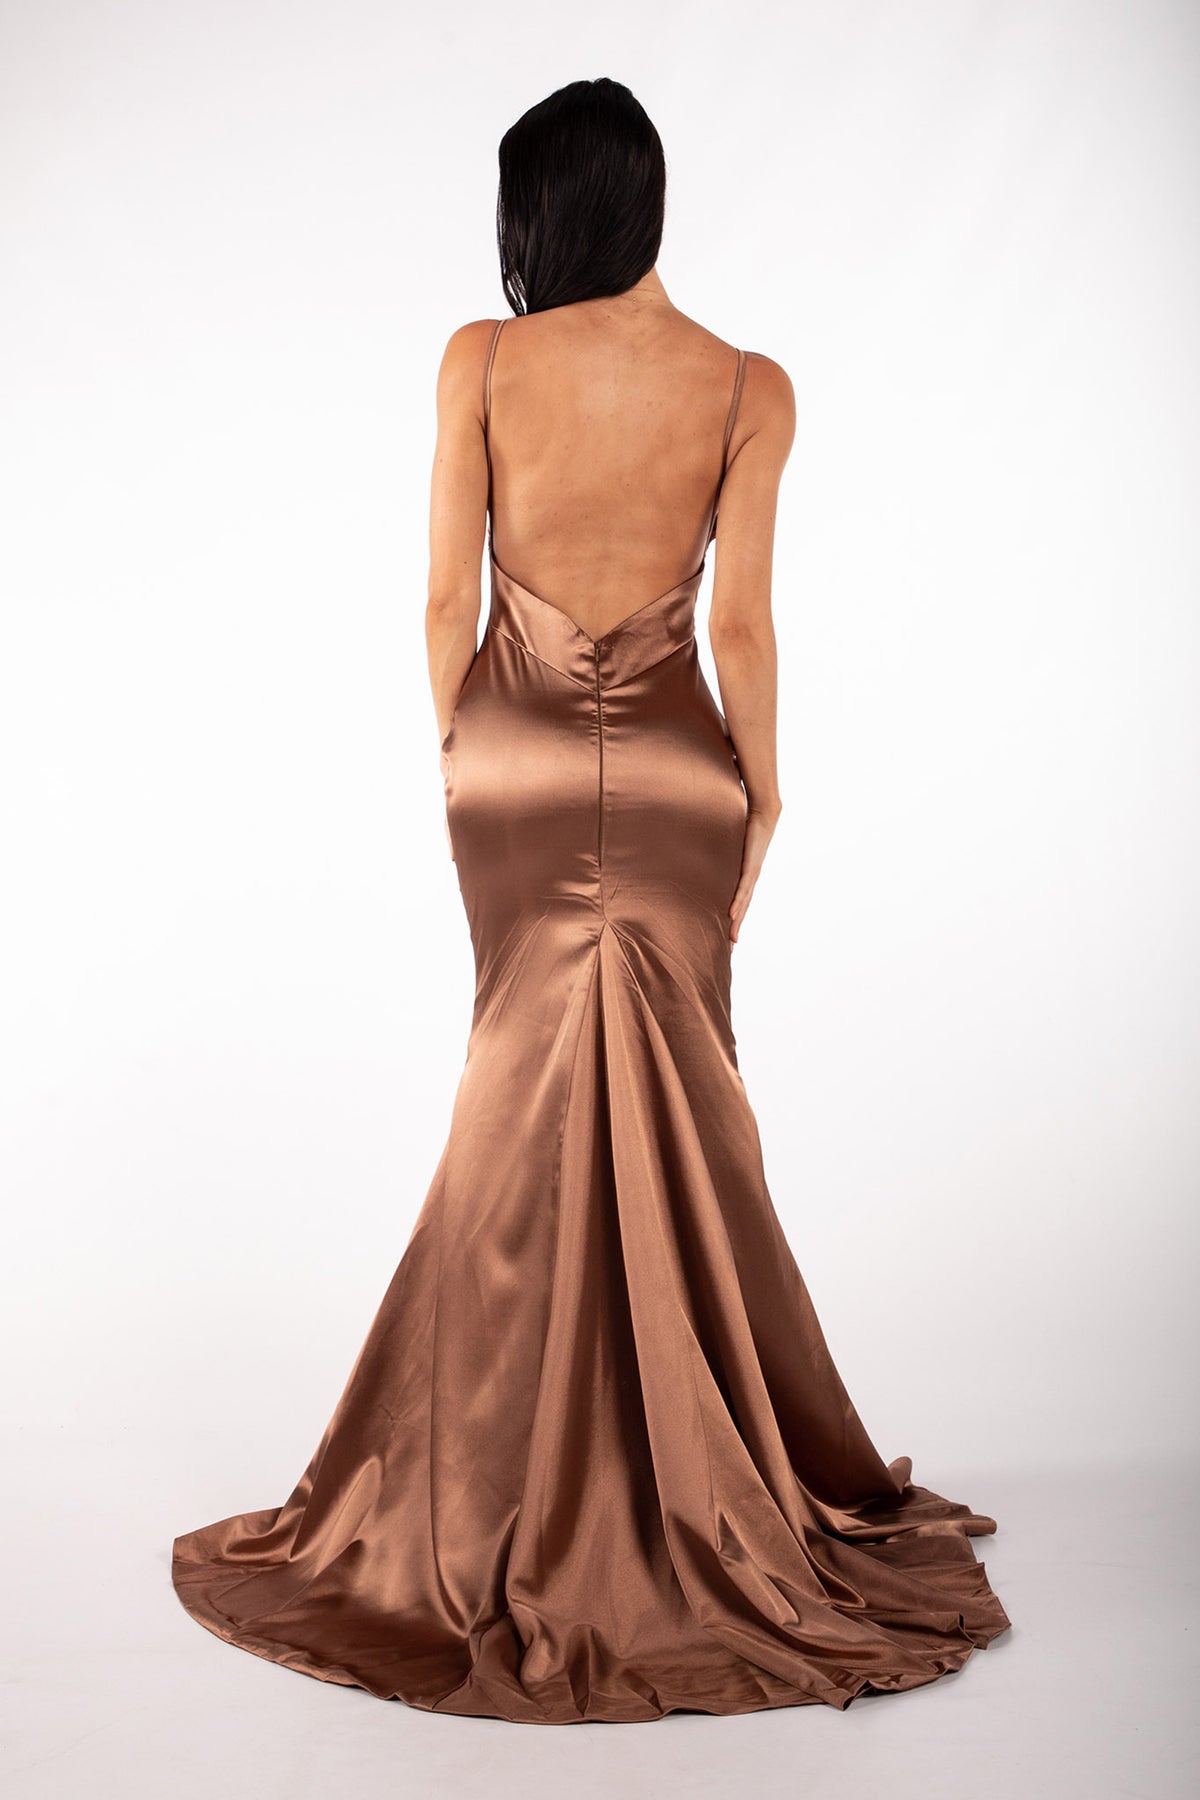 Backless Design of Brown Satin Full Length Mermaid Evening Gown with V Neck and Sweep Train